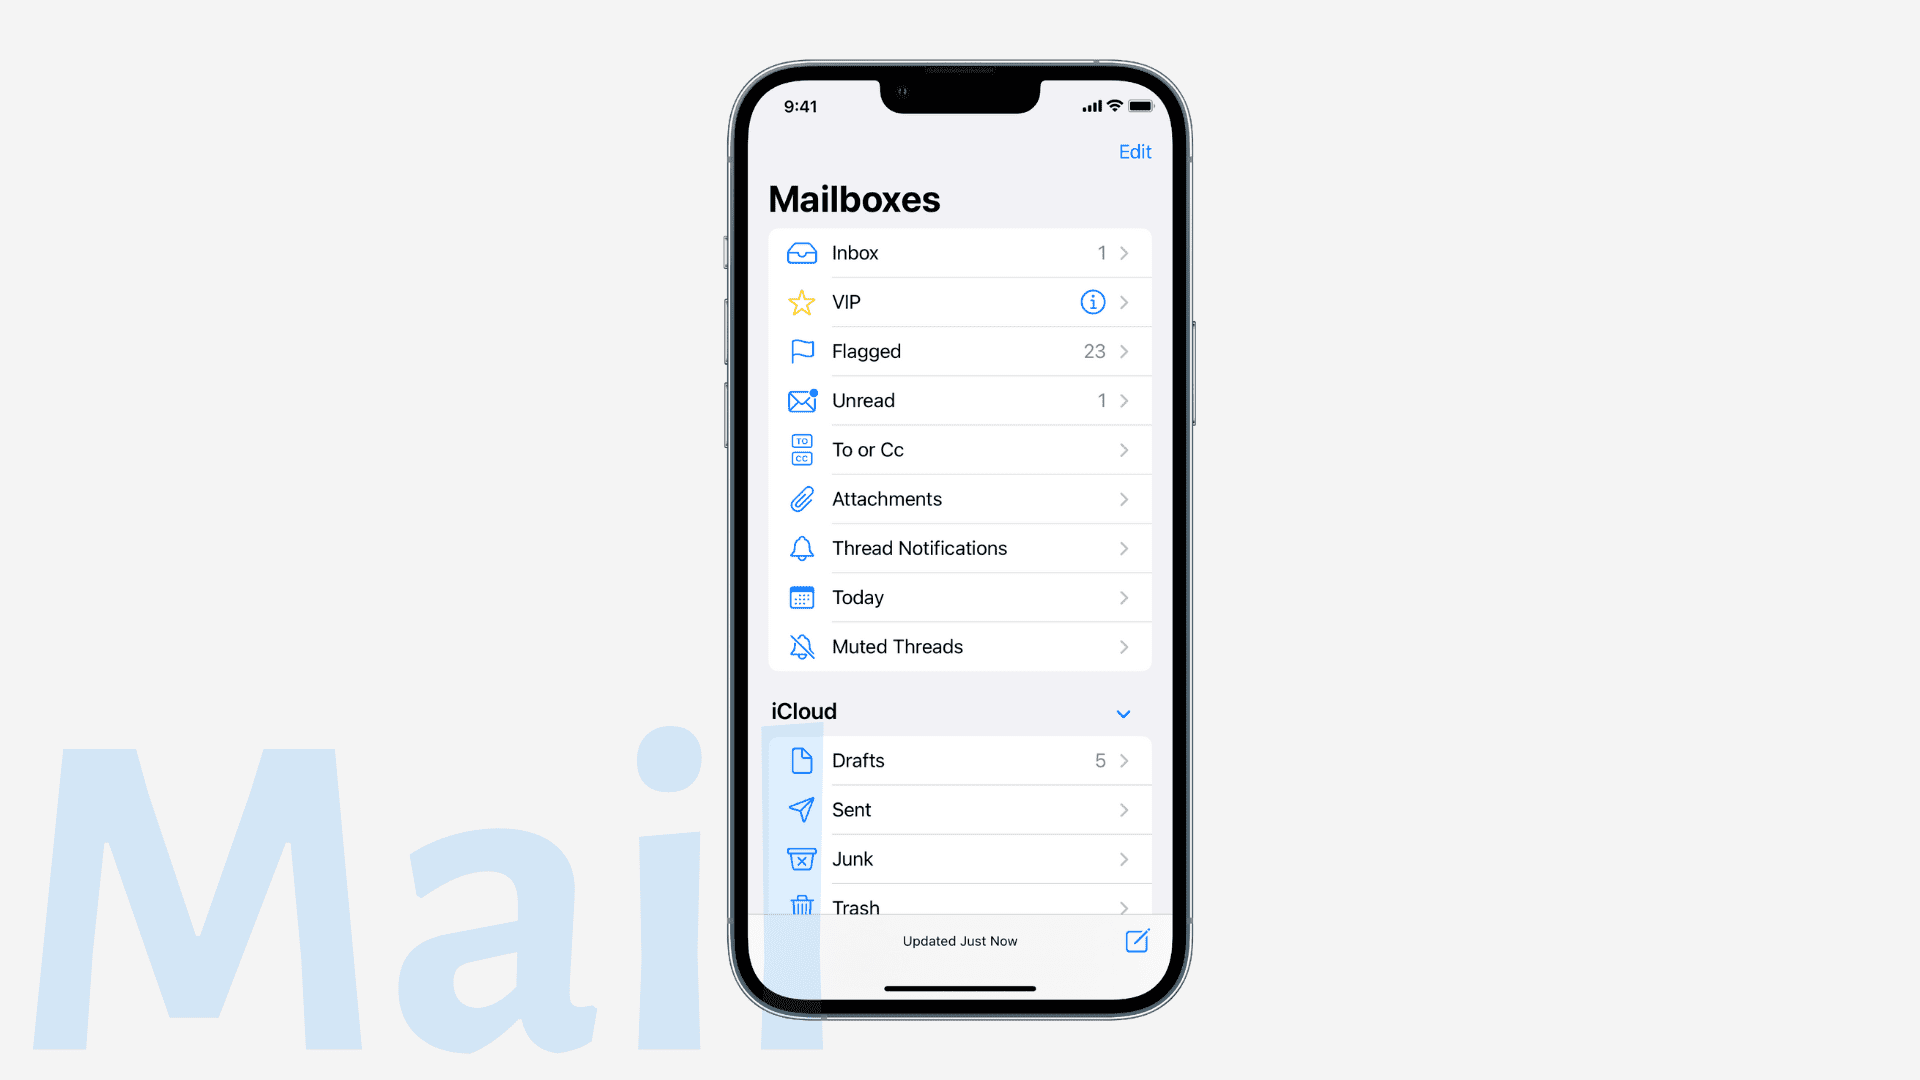 New Mail features in iOS 16